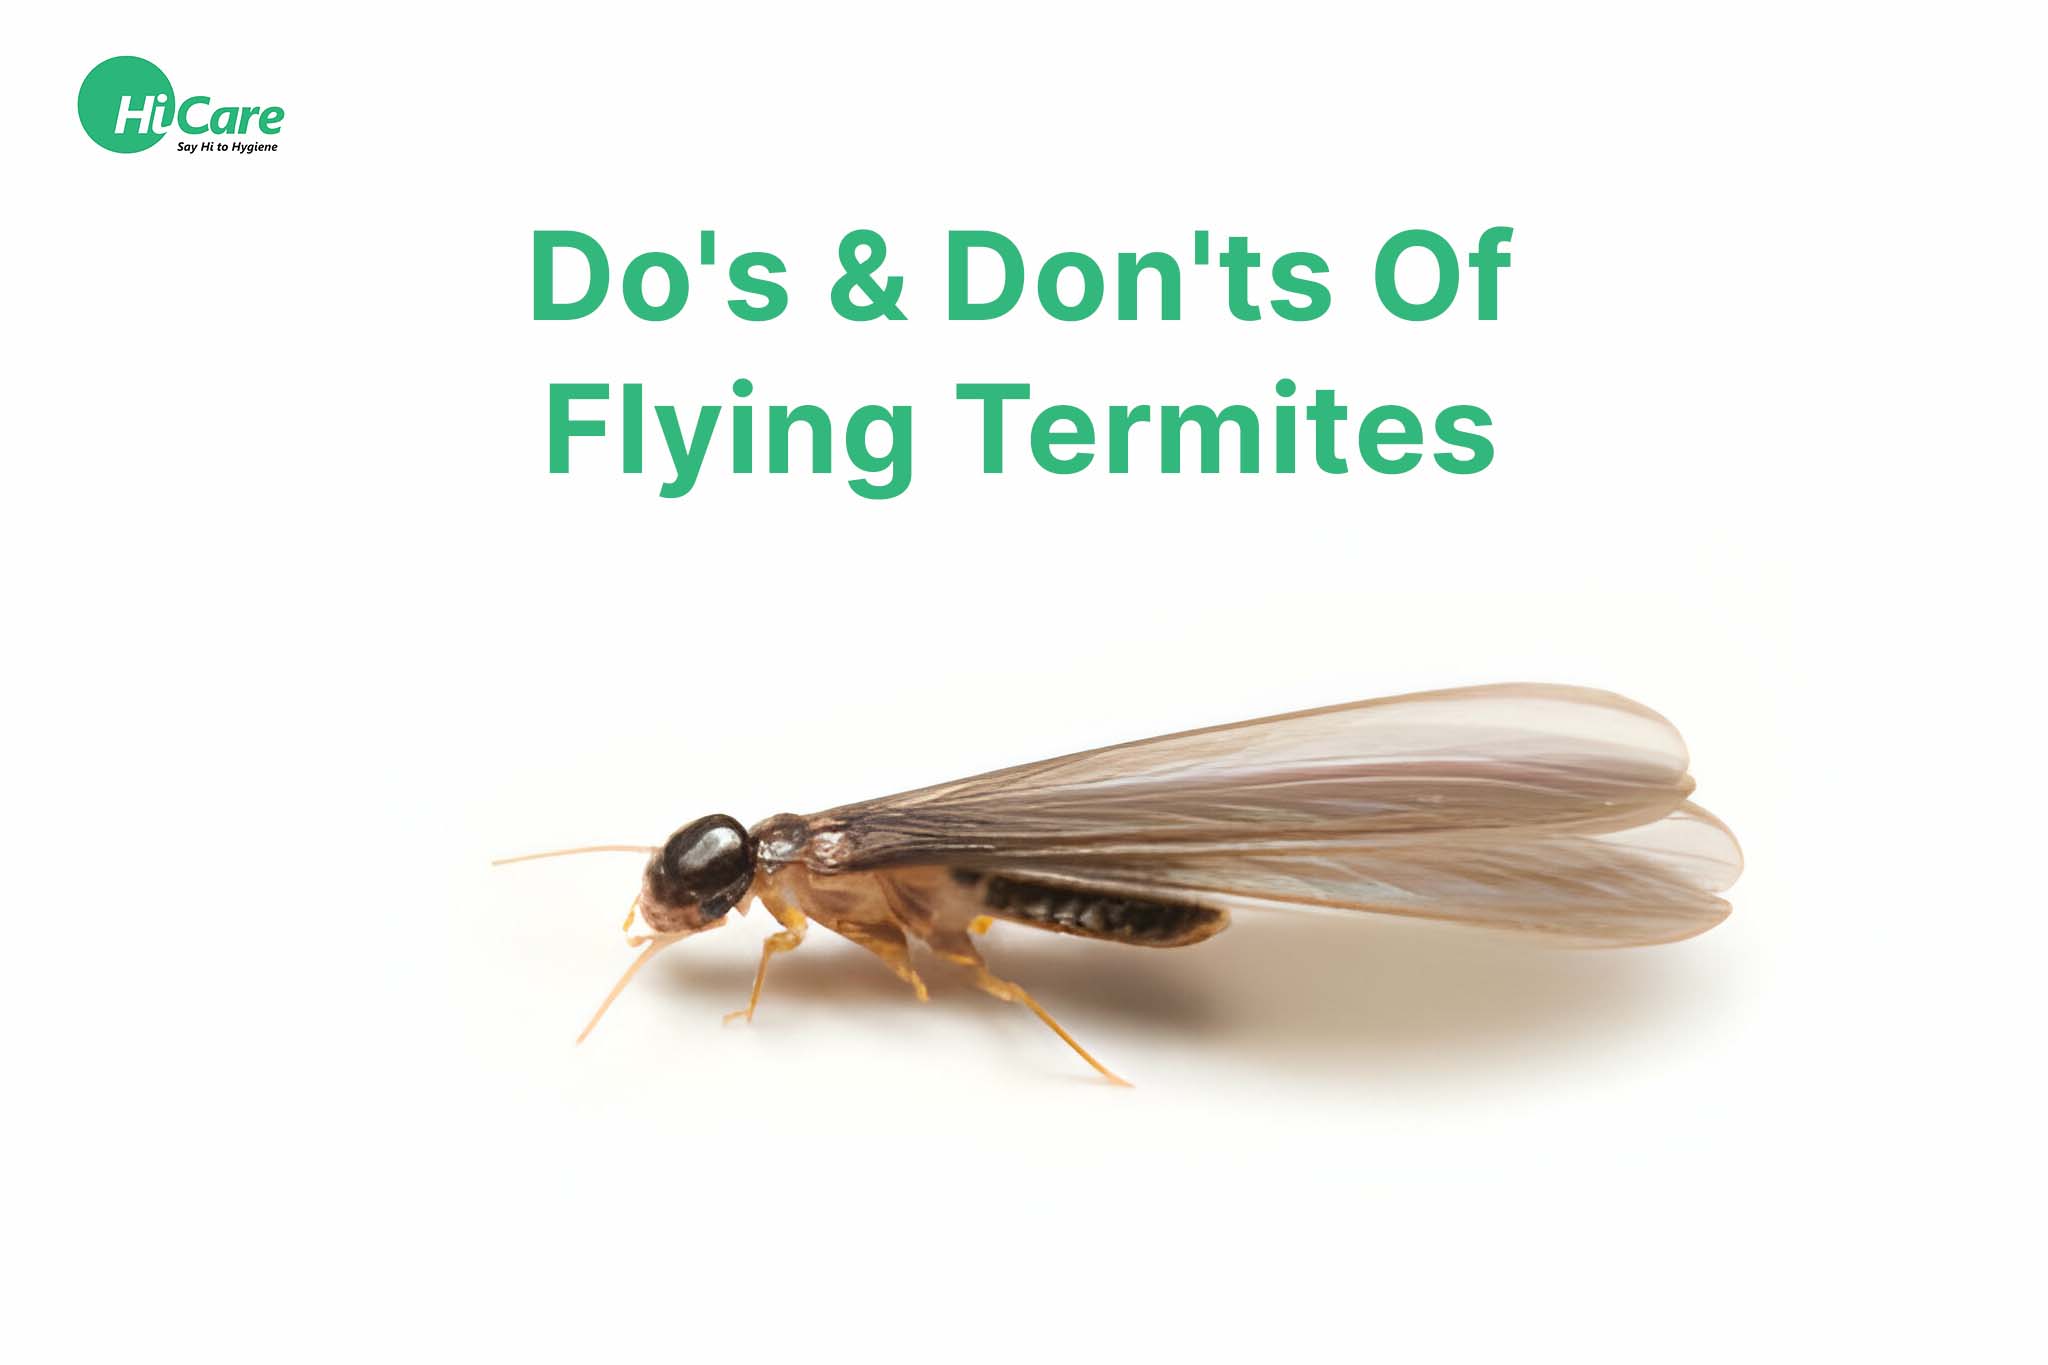 5 Do’s & Don’ts of Flying Termites